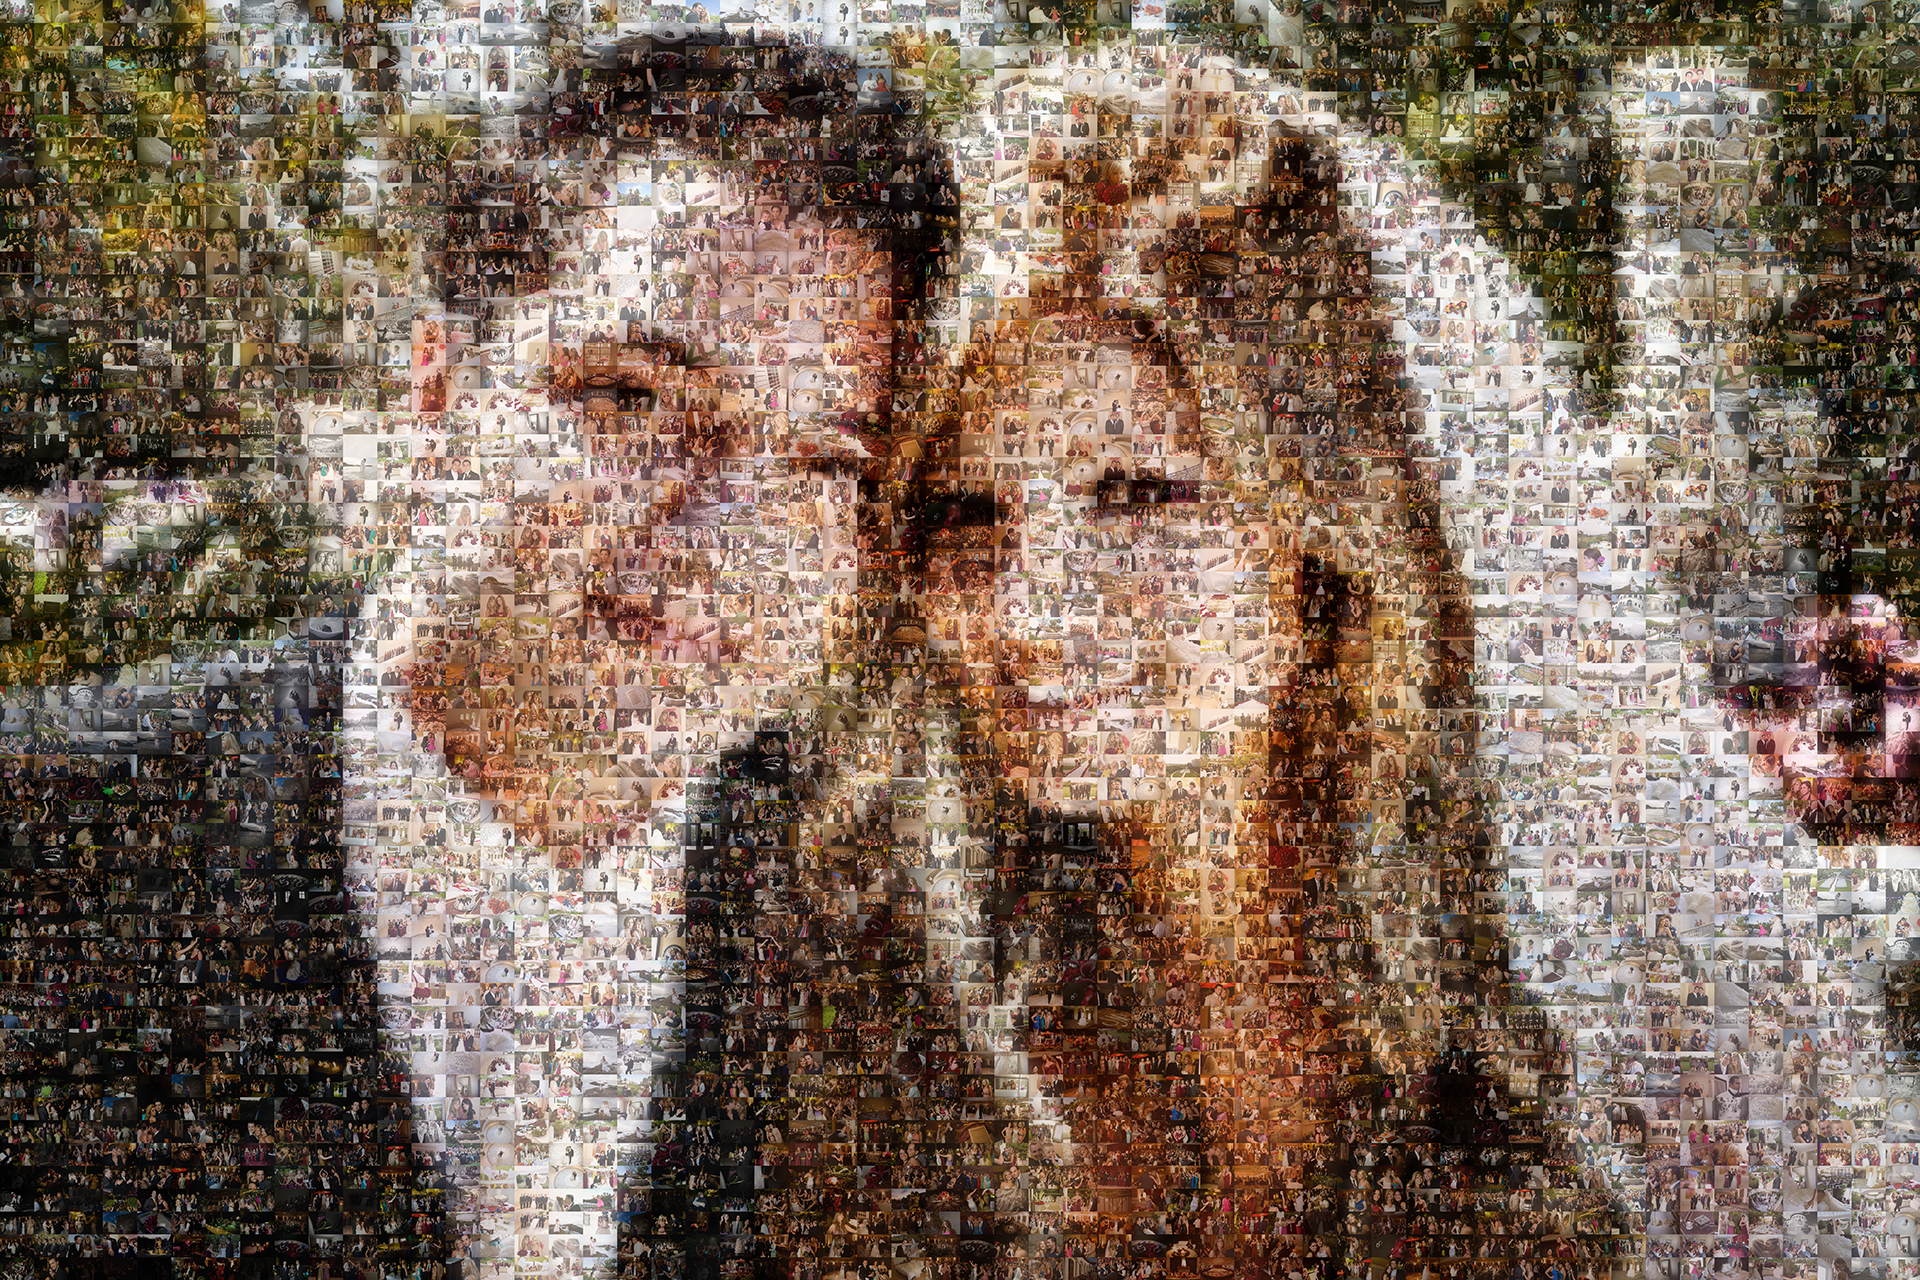 photo mosaic created using 1200 photographer selected photos from their wedding celebration